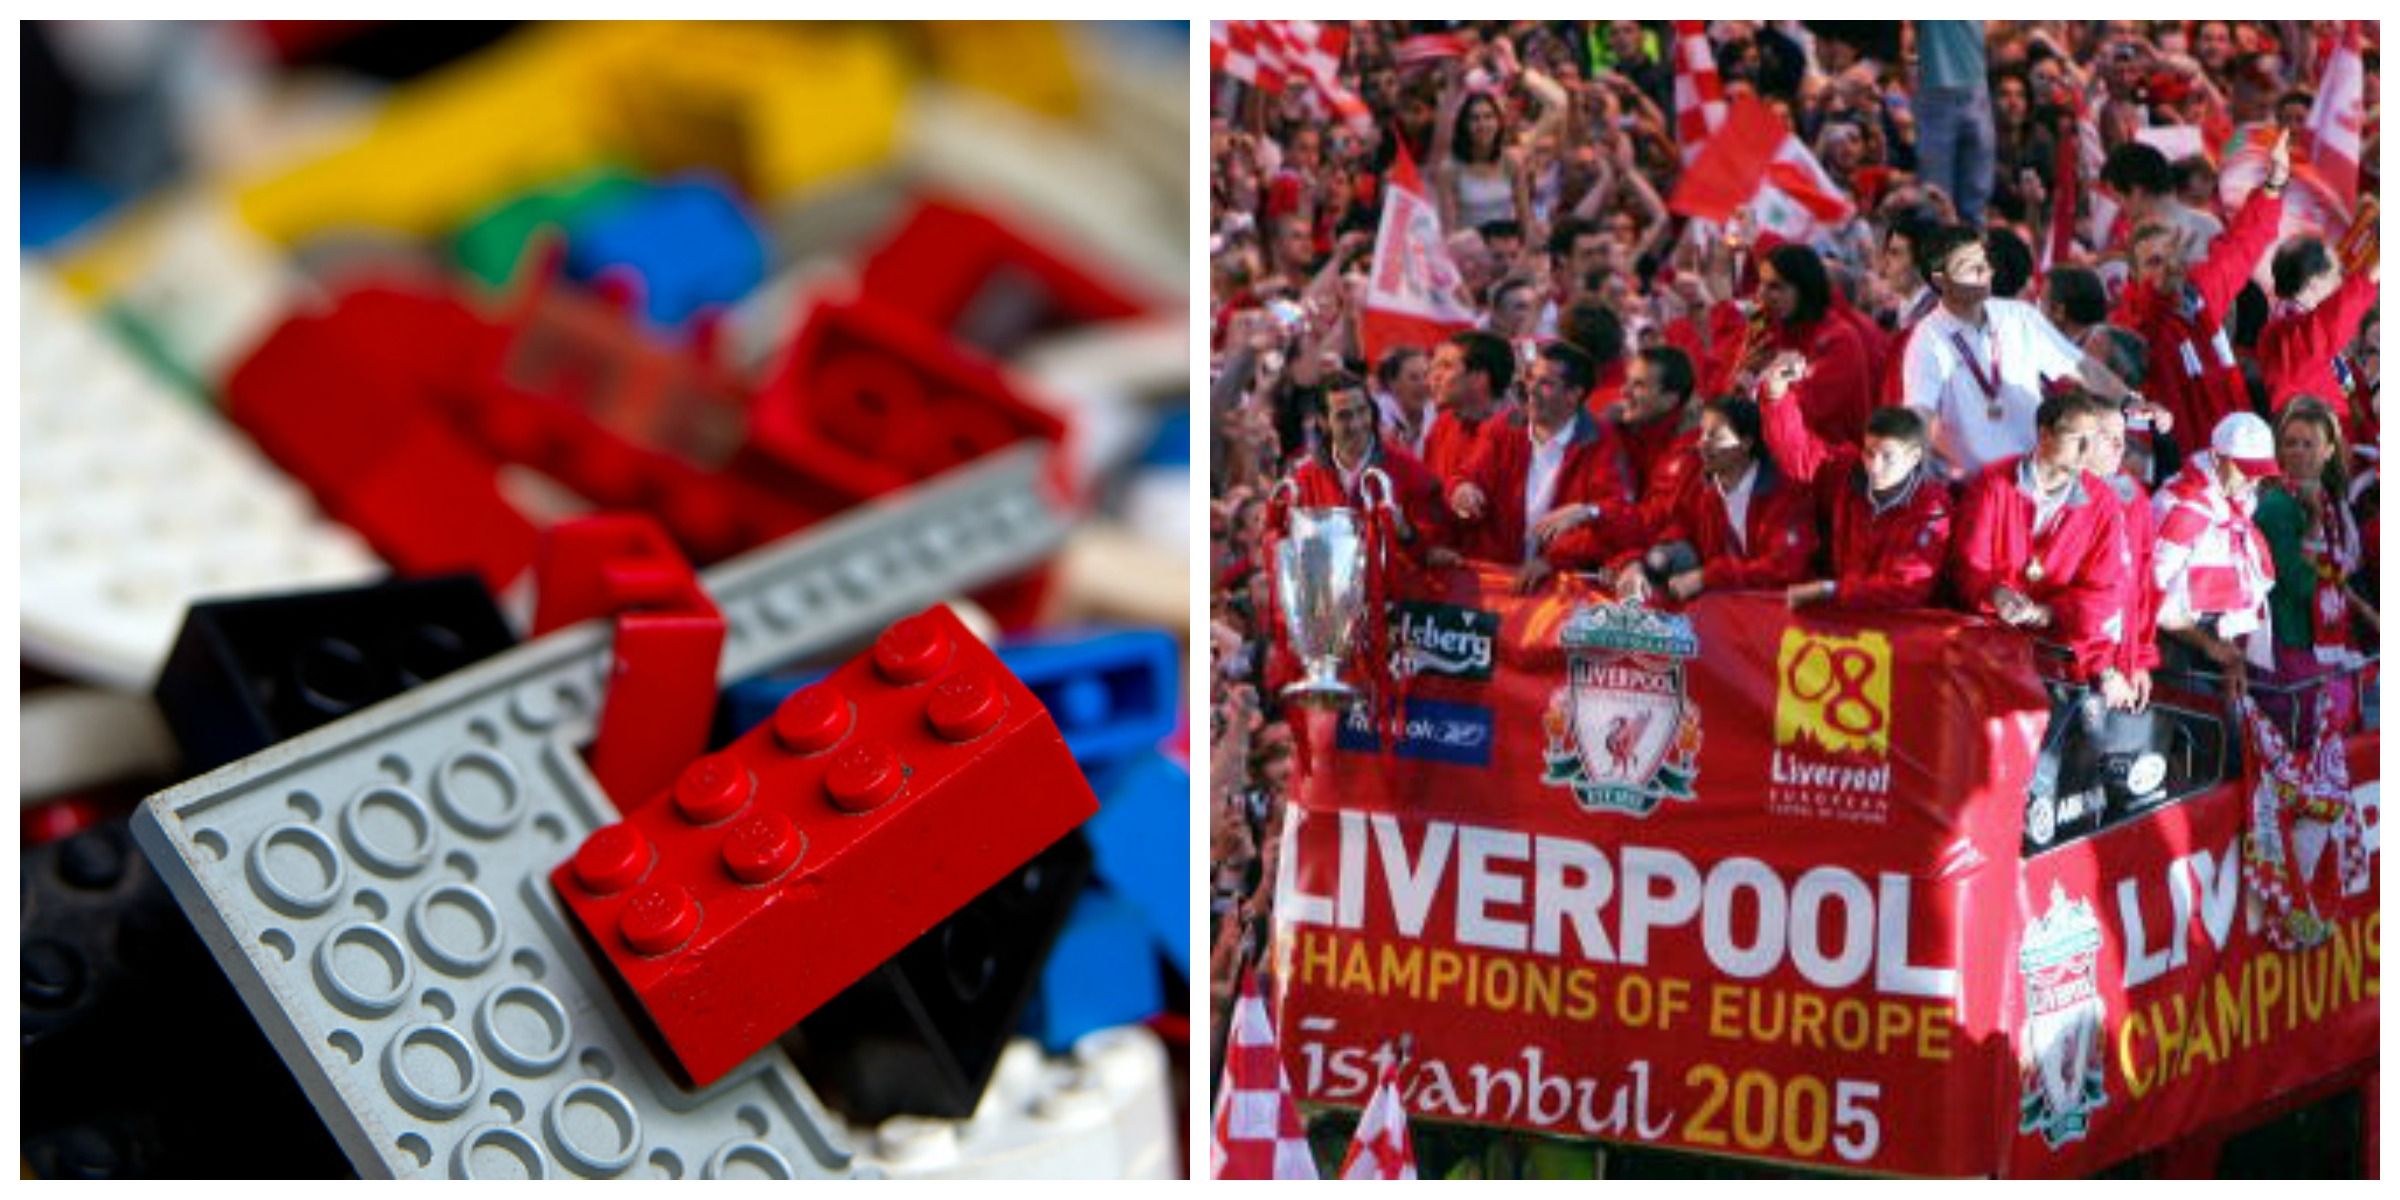 There's now a lego version Liverpool's Champions League parade bus - JOE.co.uk